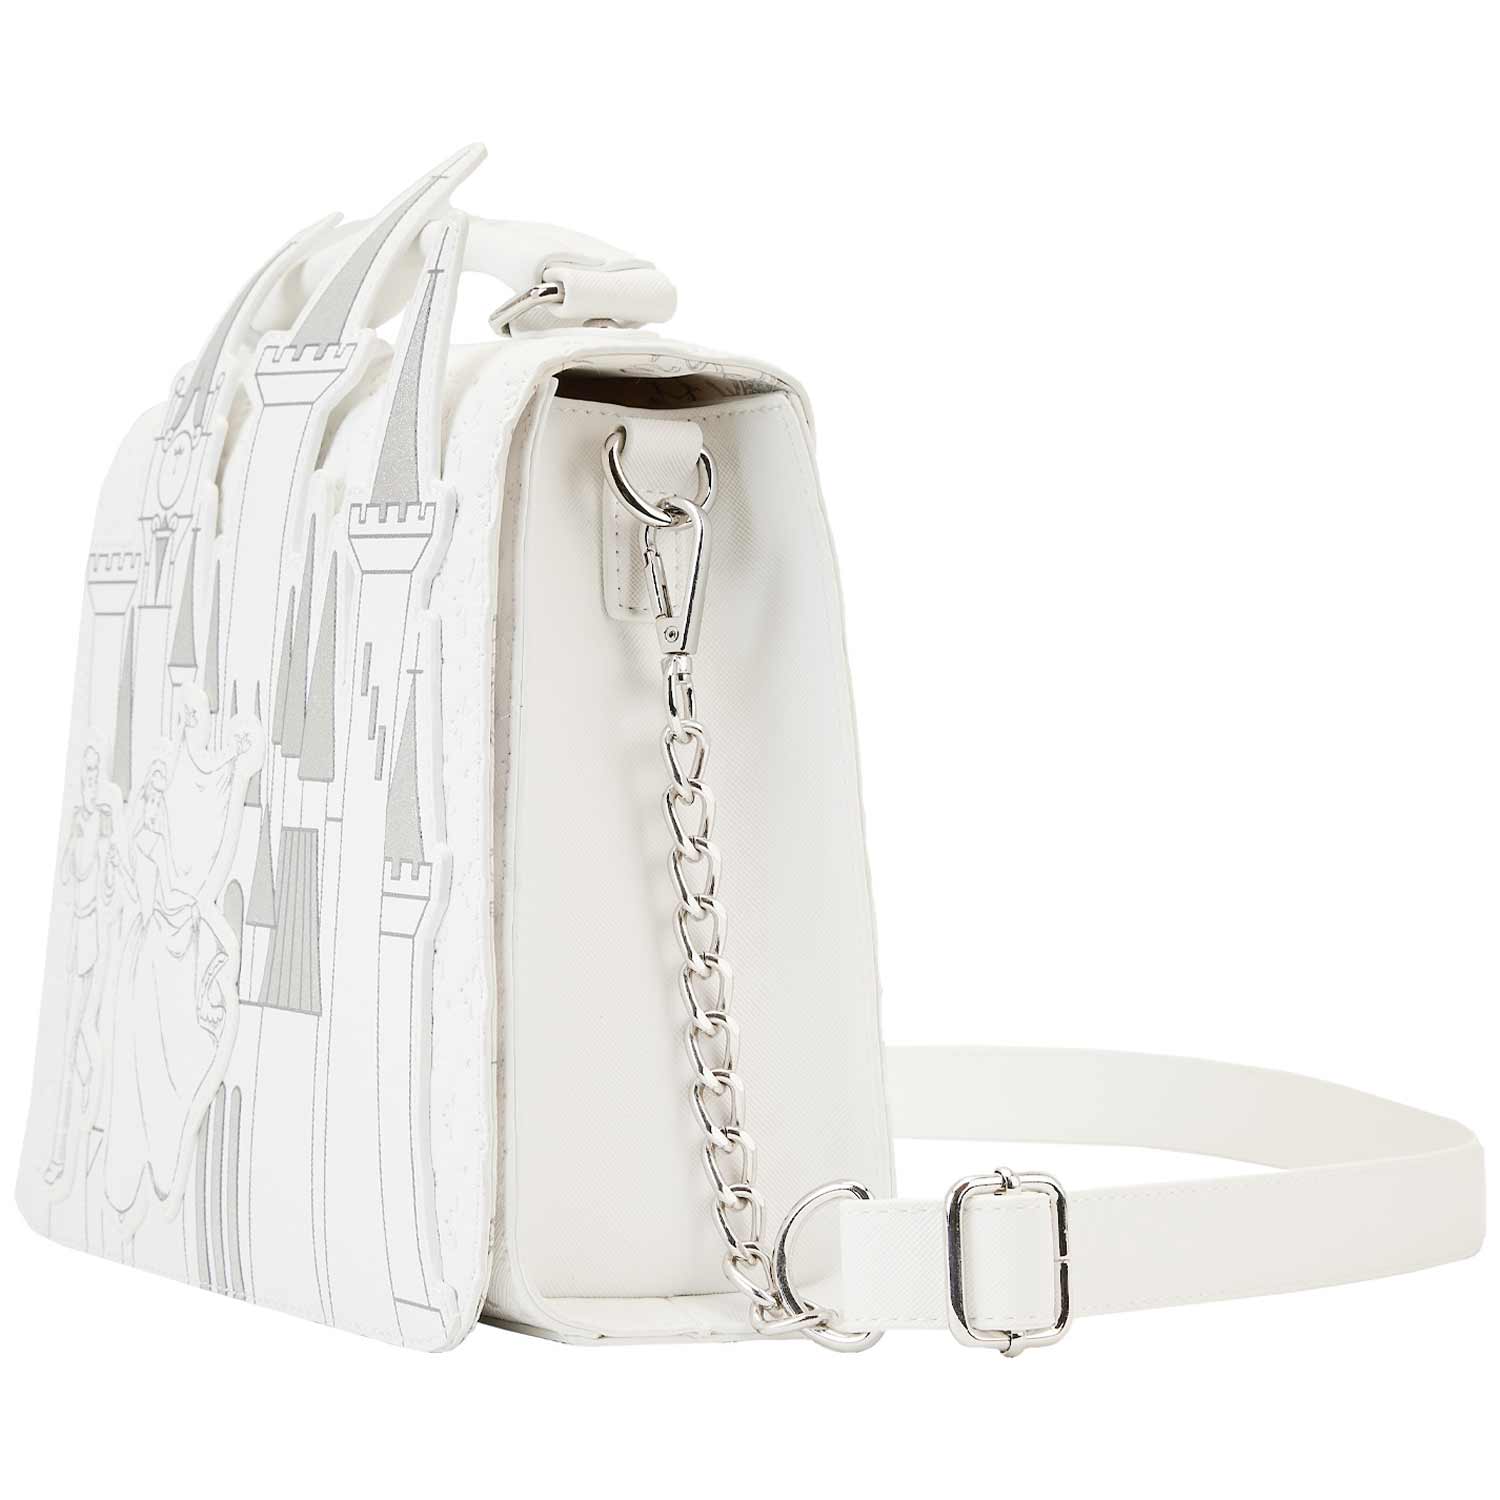 Loungefly x Disney Cinderella Happily Ever After Crossbody Bag